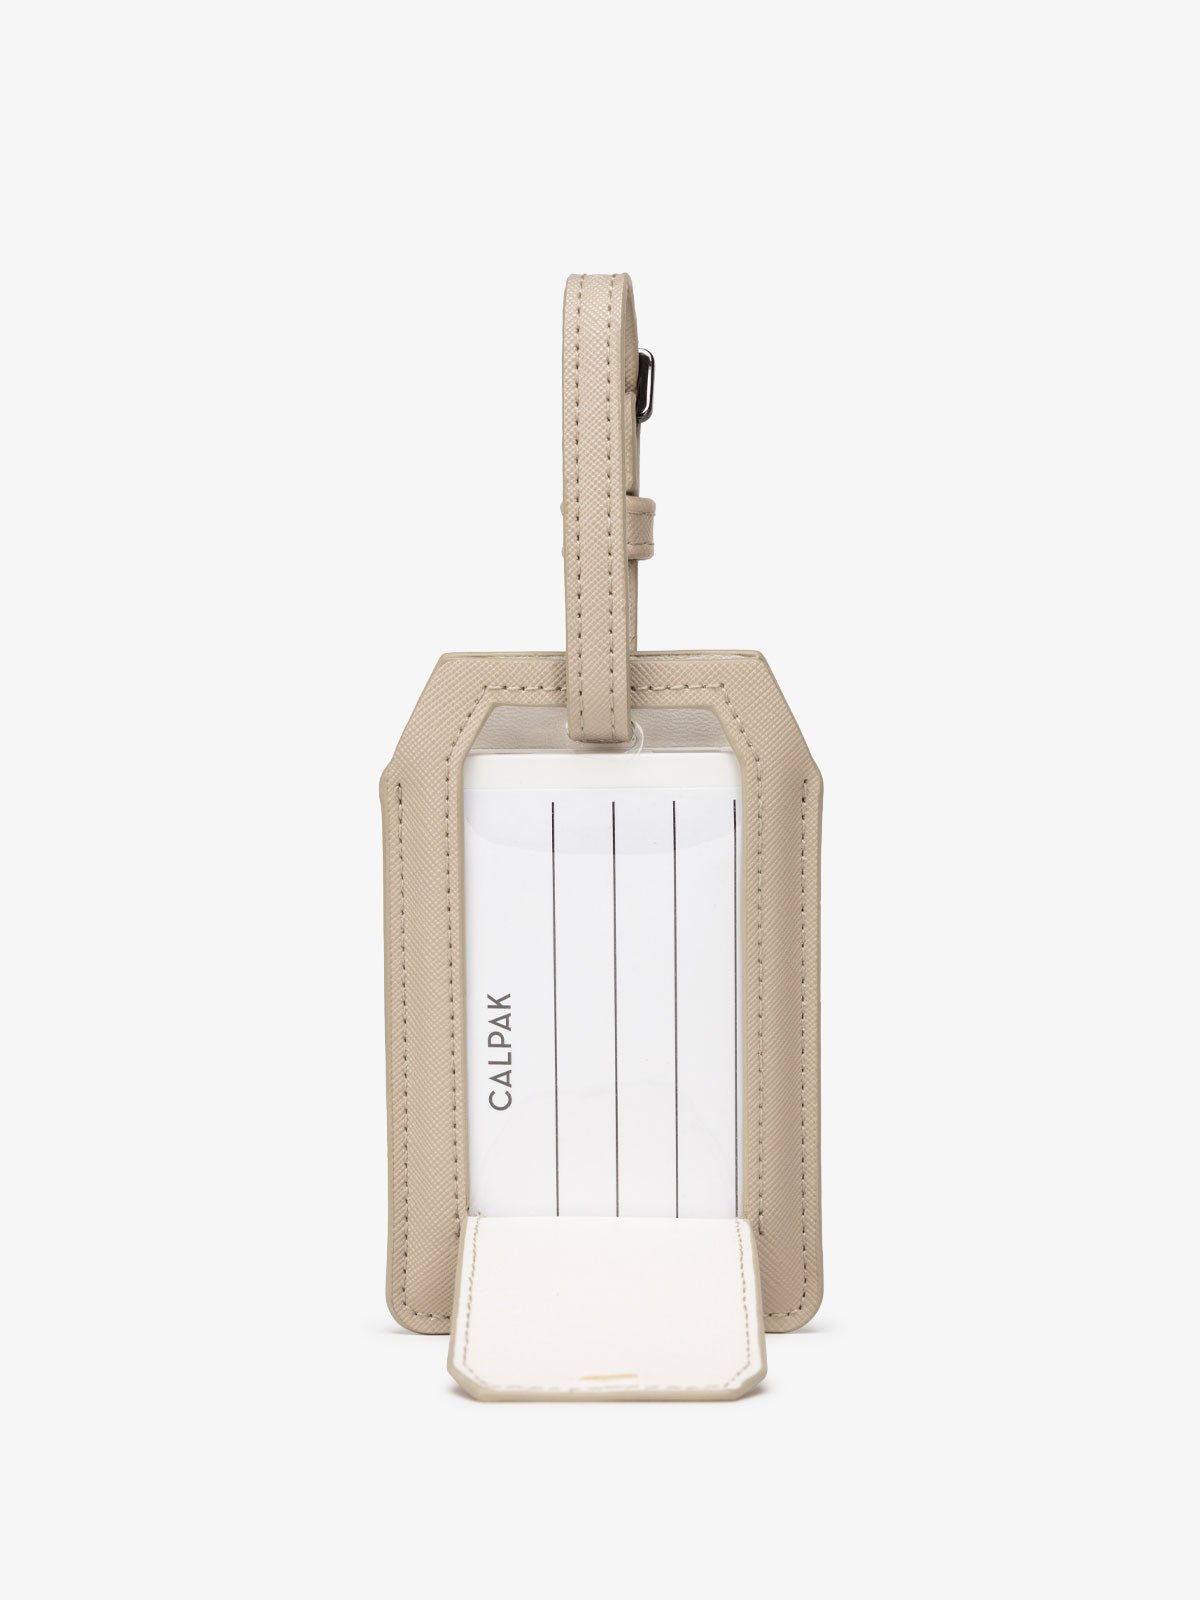 CALPAK luggage tag with portable charger in stone